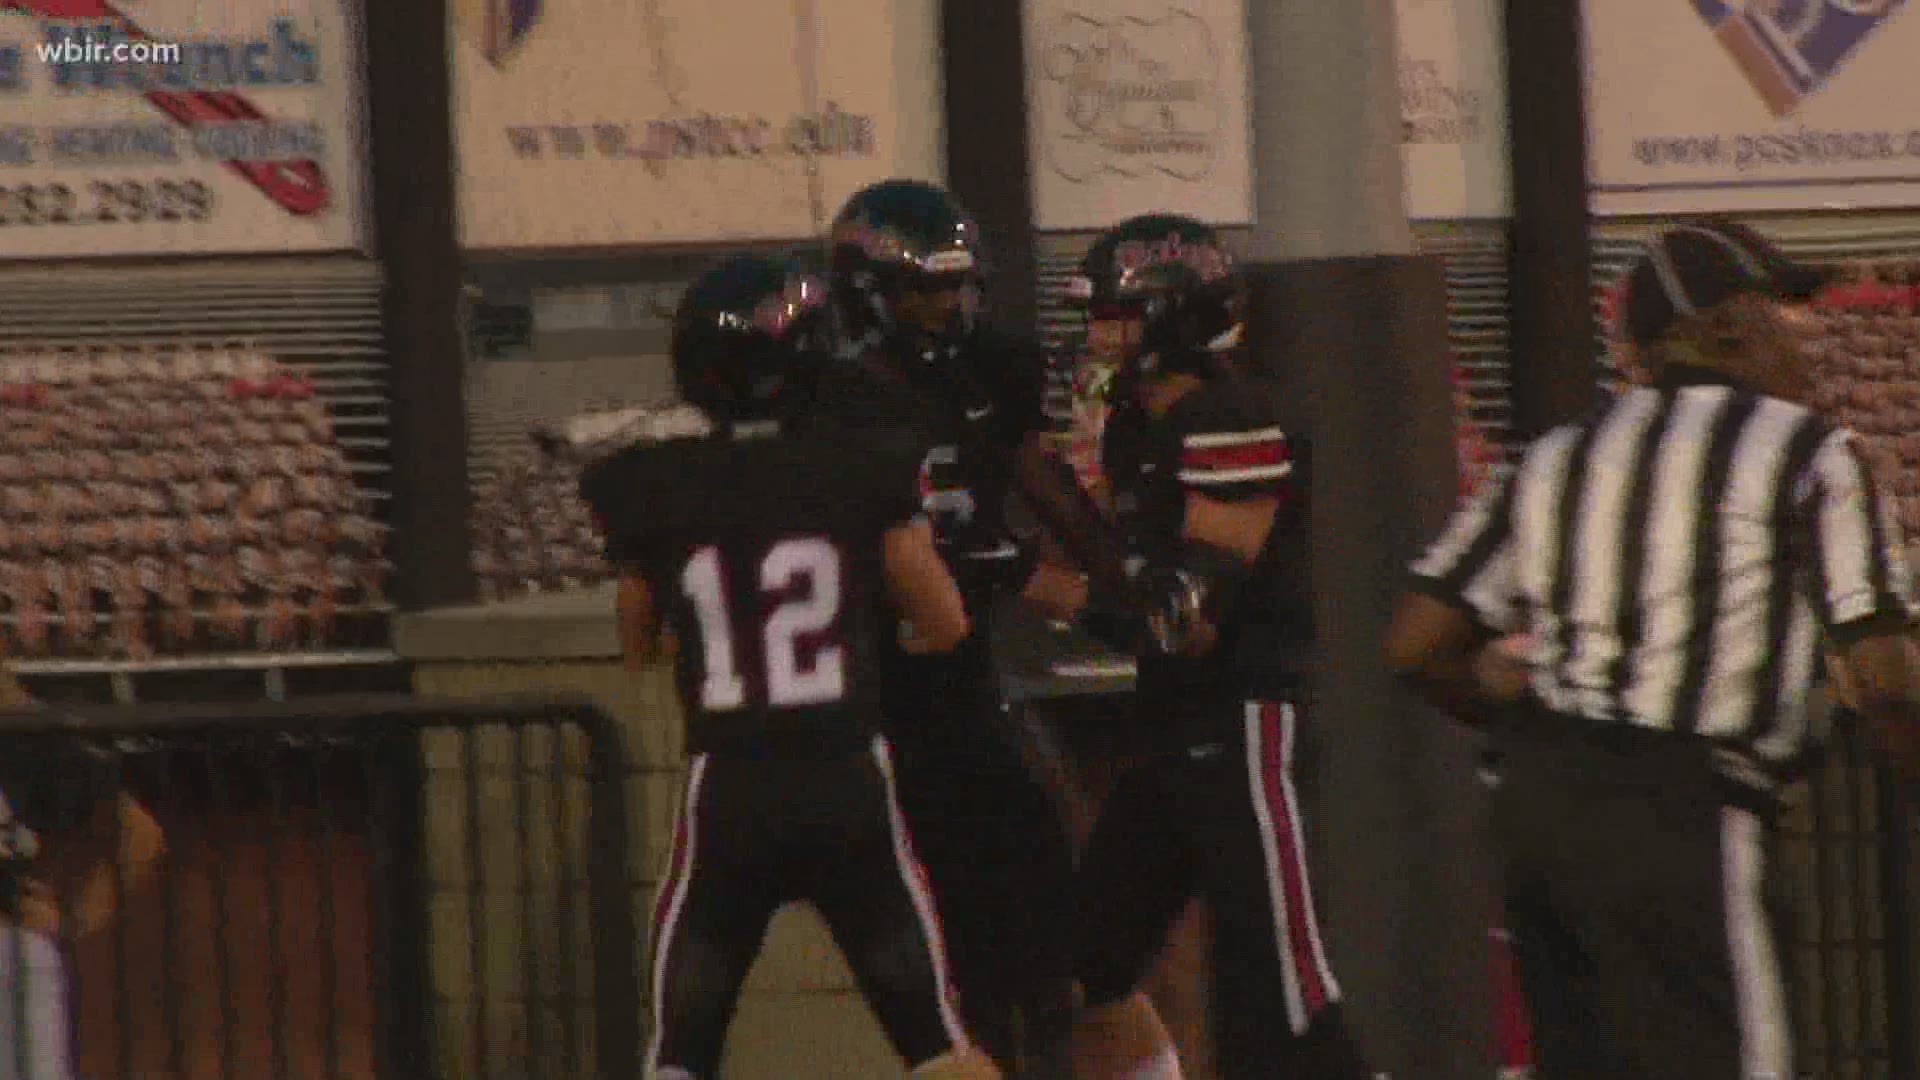 Maryville takes care of business against Cleveland, 34-7 the final.